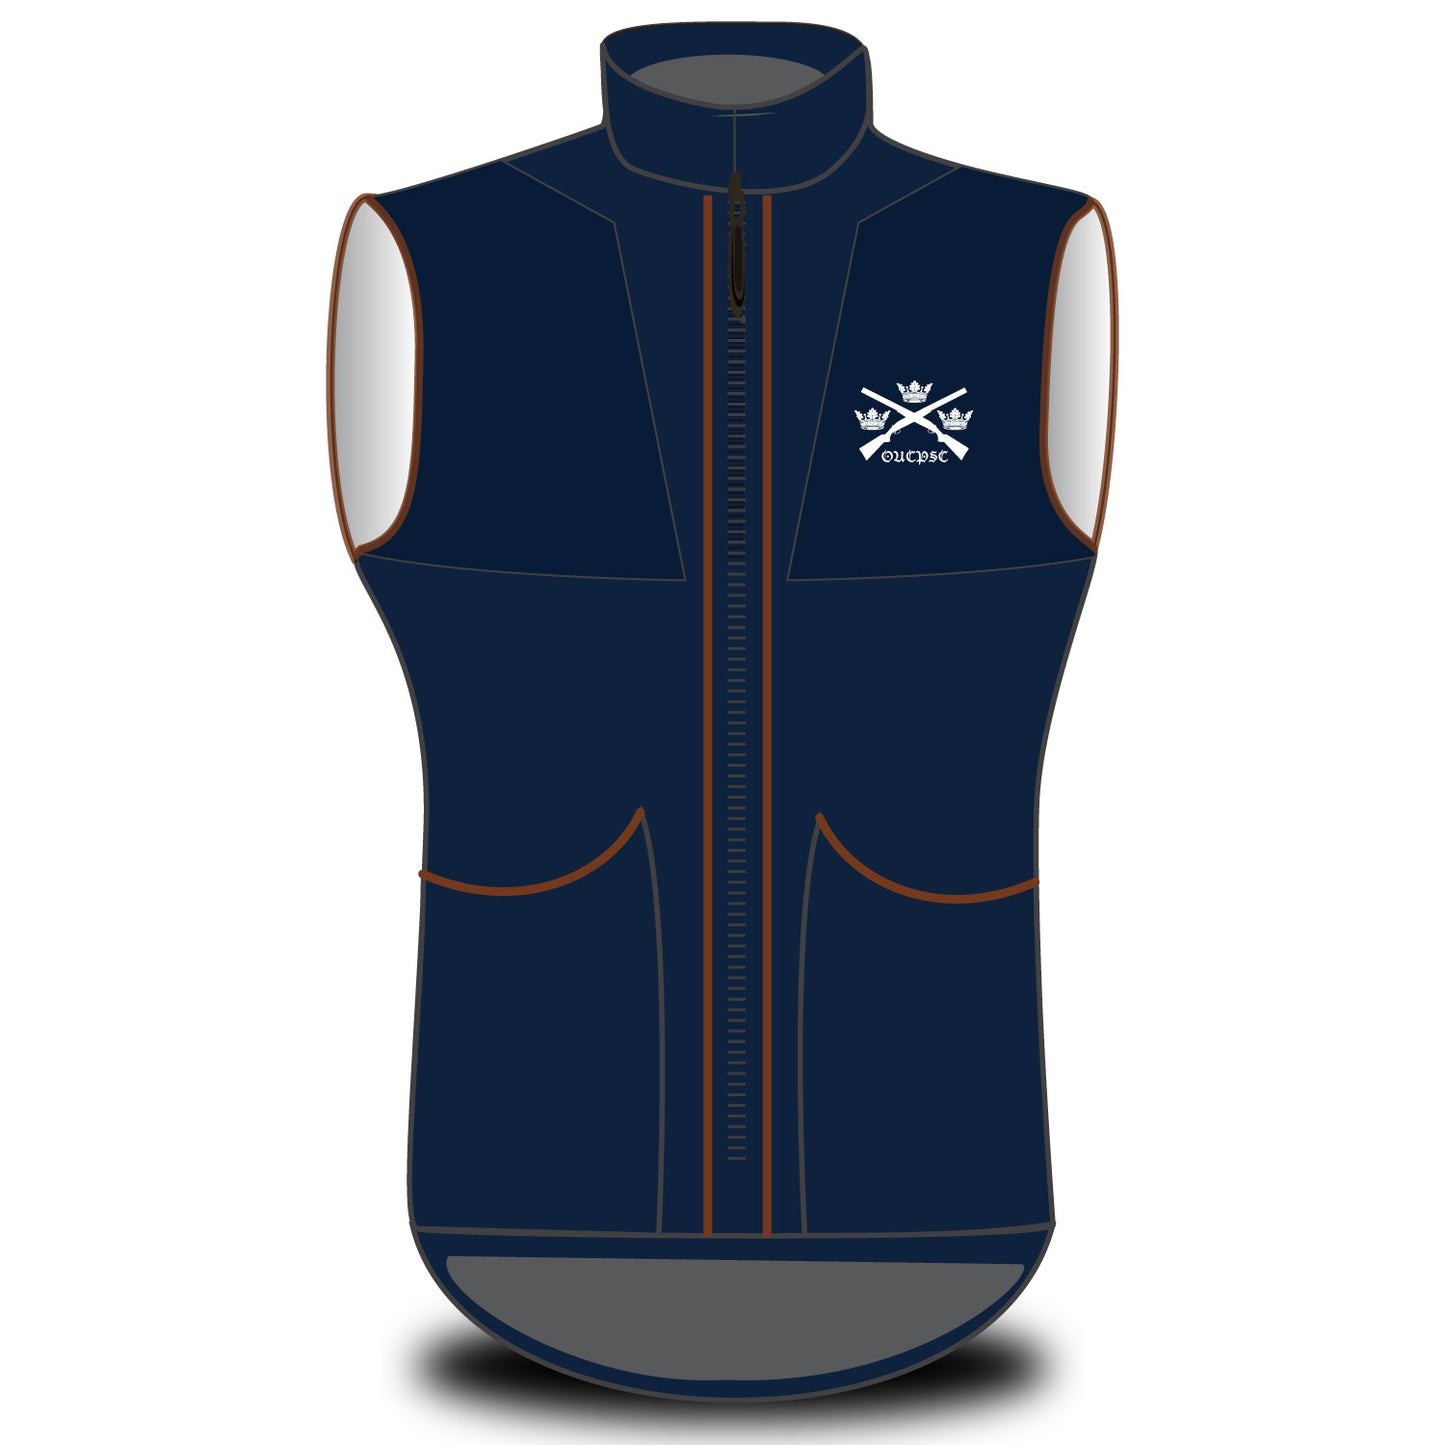 Oxford University Clay Pigeon Shooting Club Technical Gilet